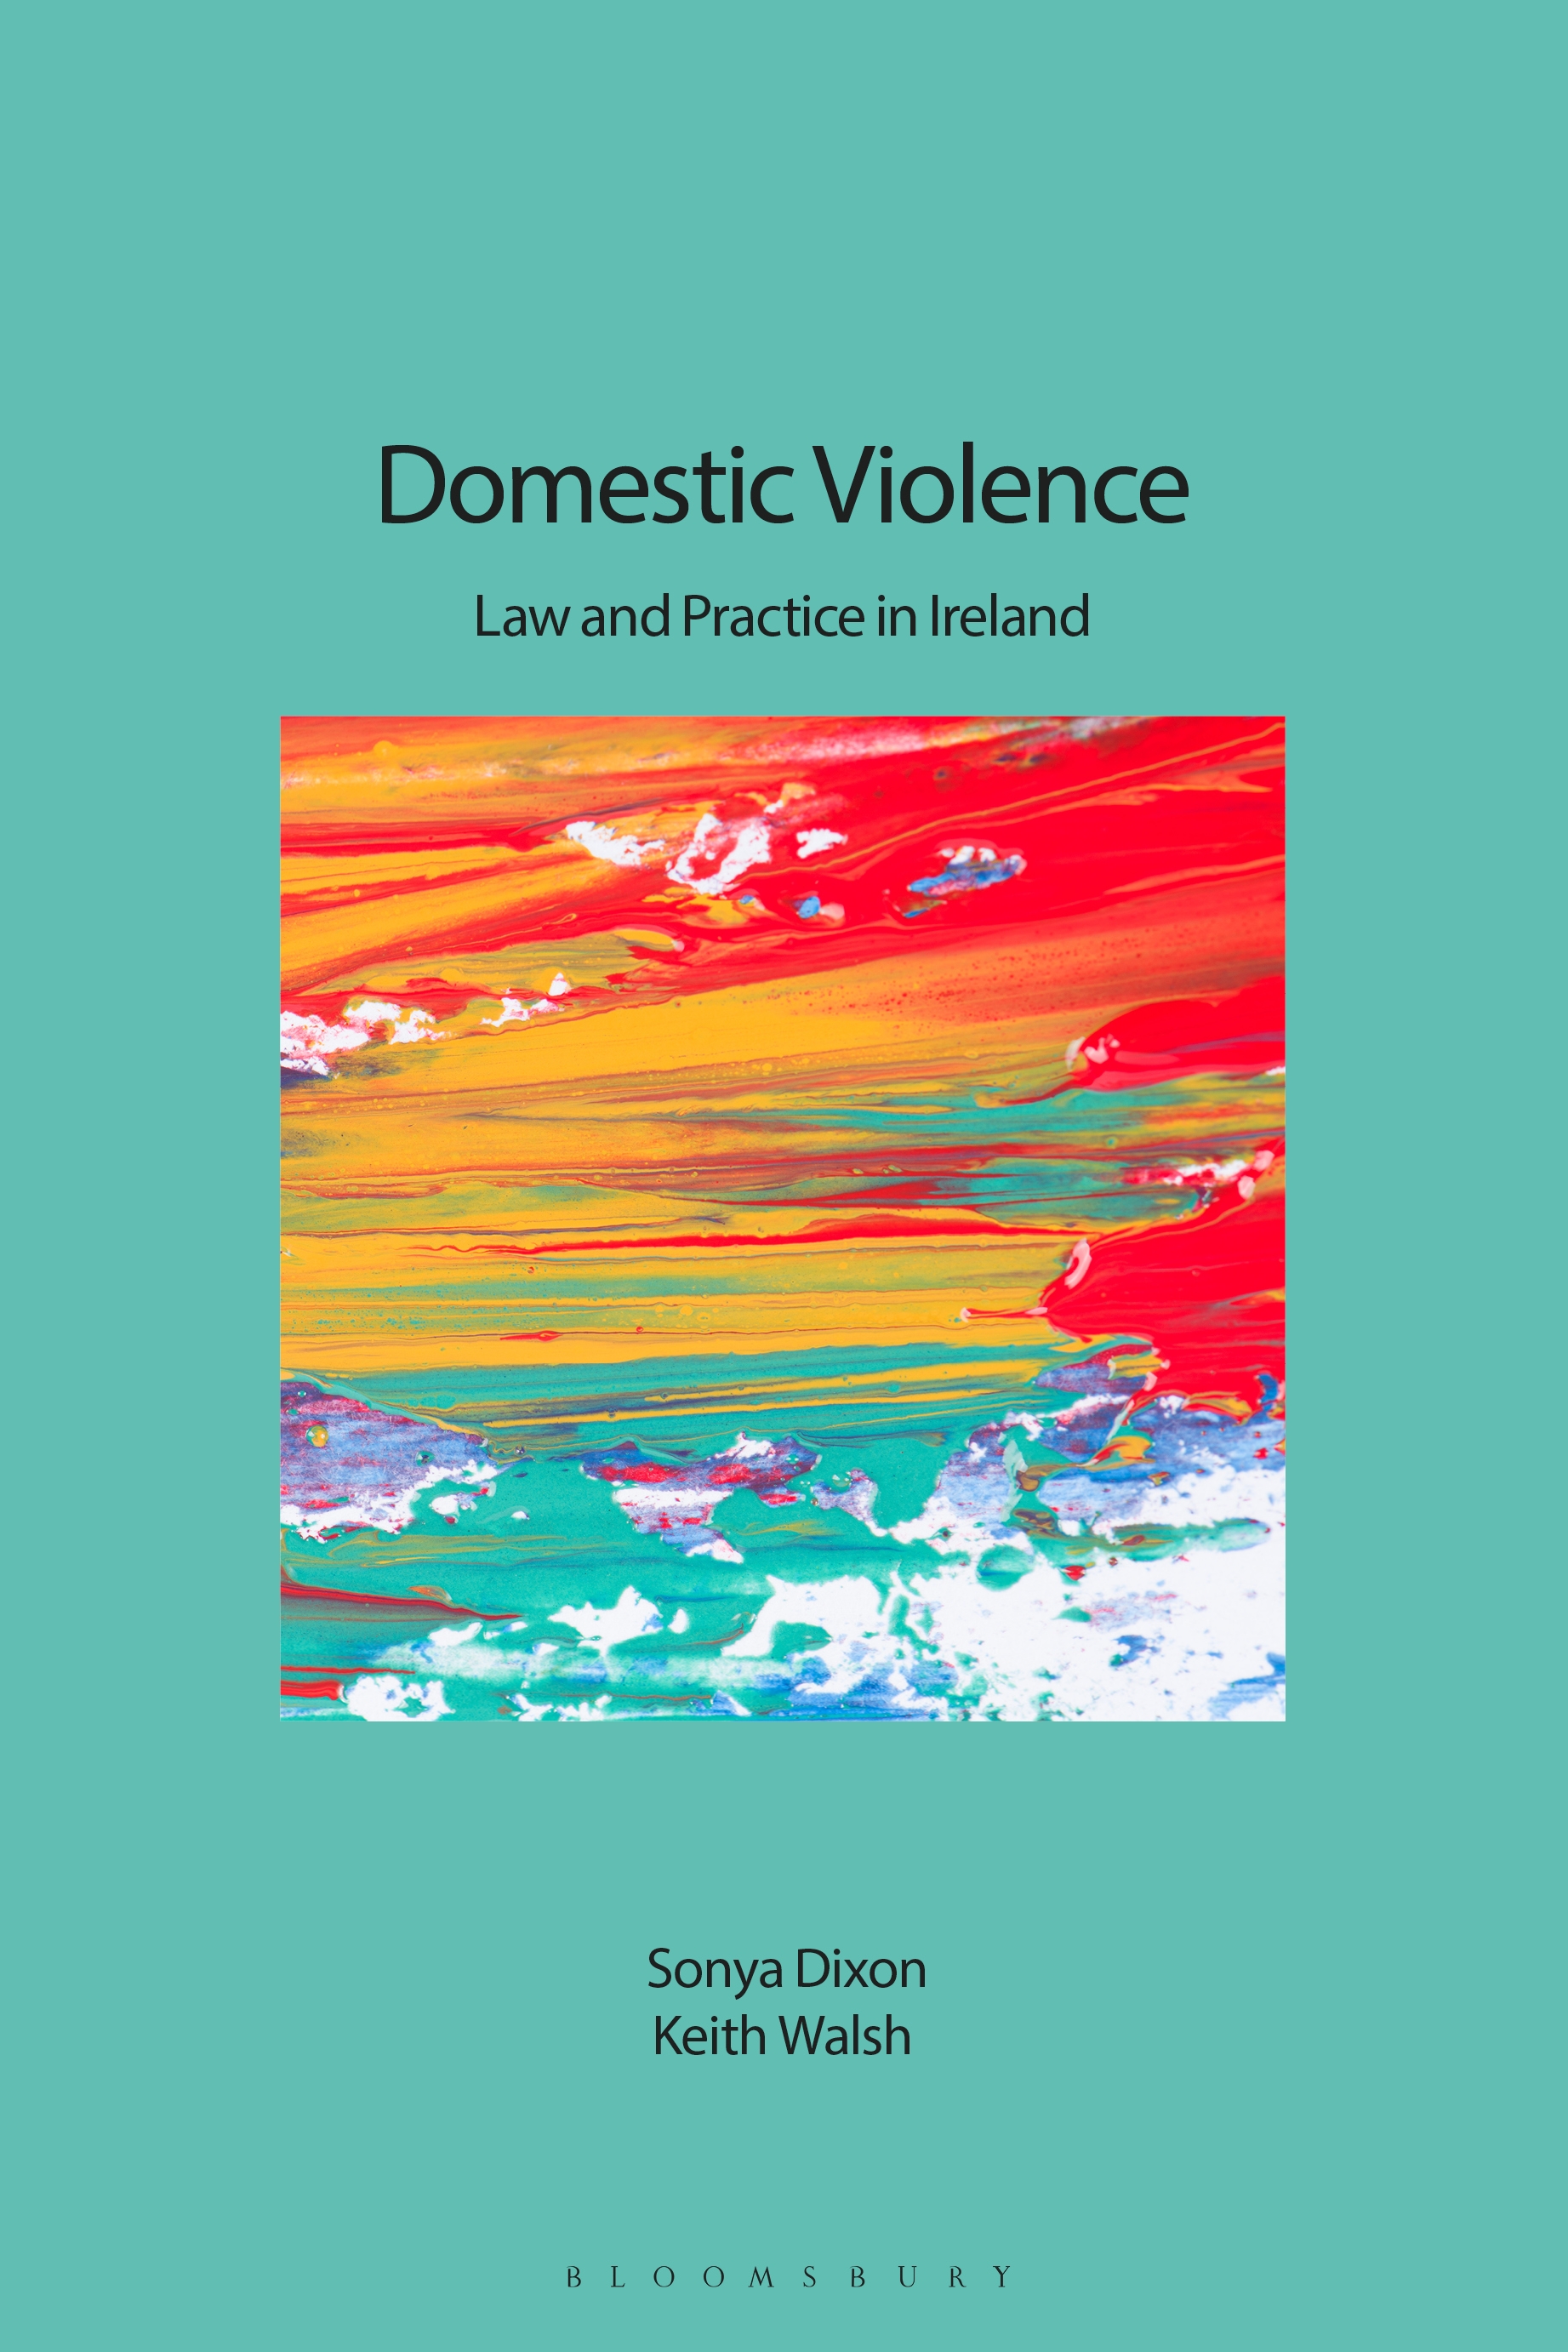 Domestic Violence: Law and Practice in Ireland book jacket